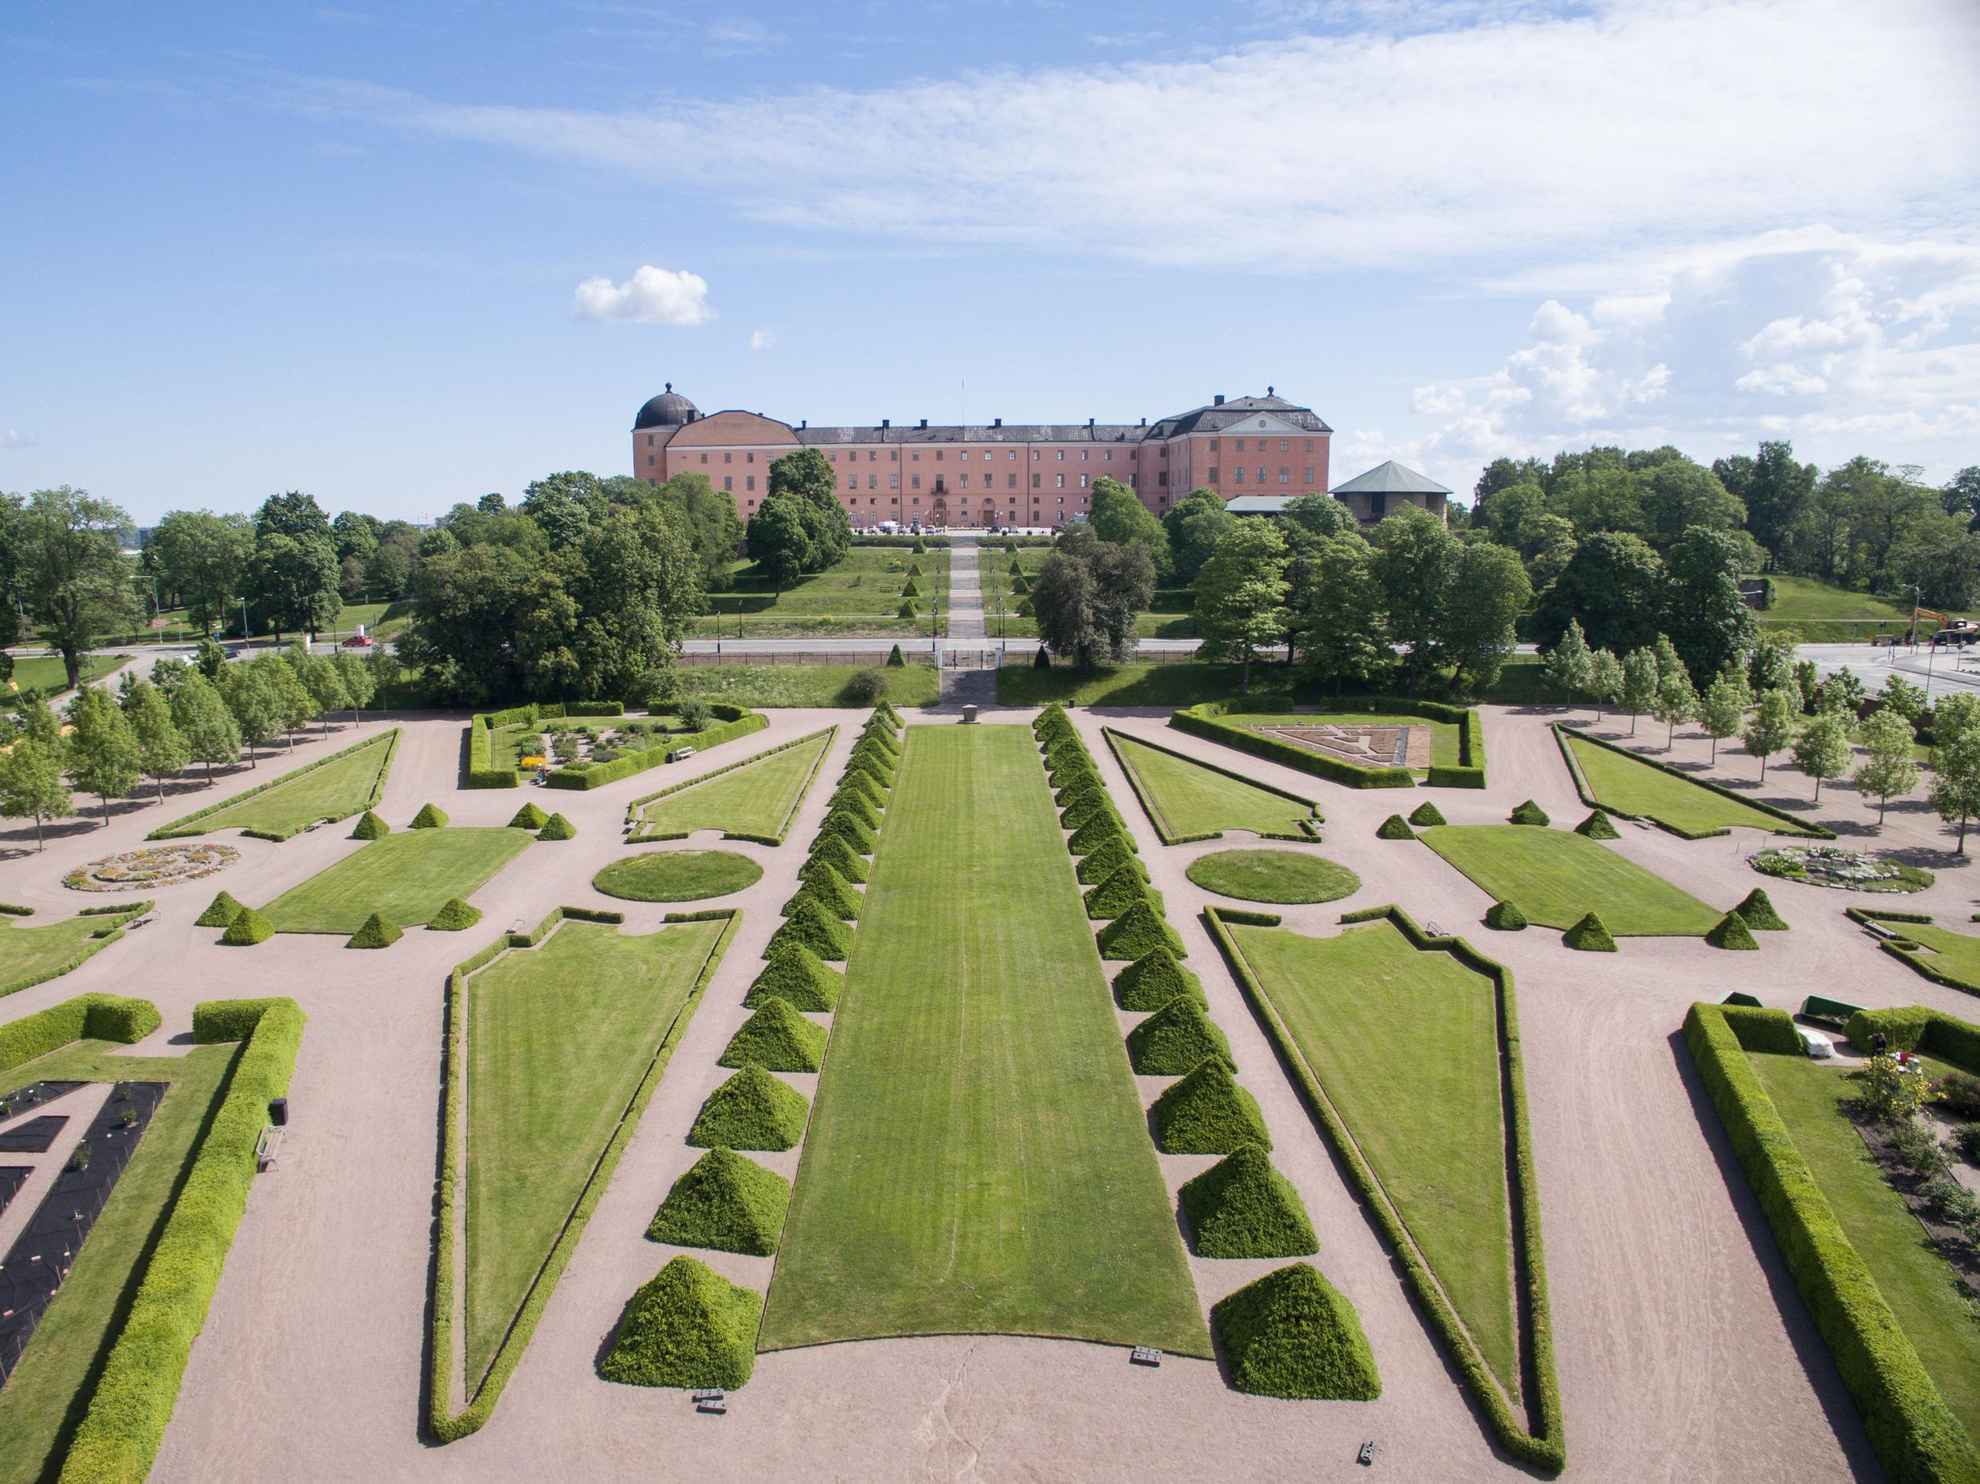 A beautiful botanical garden in front of Uppsala castle.